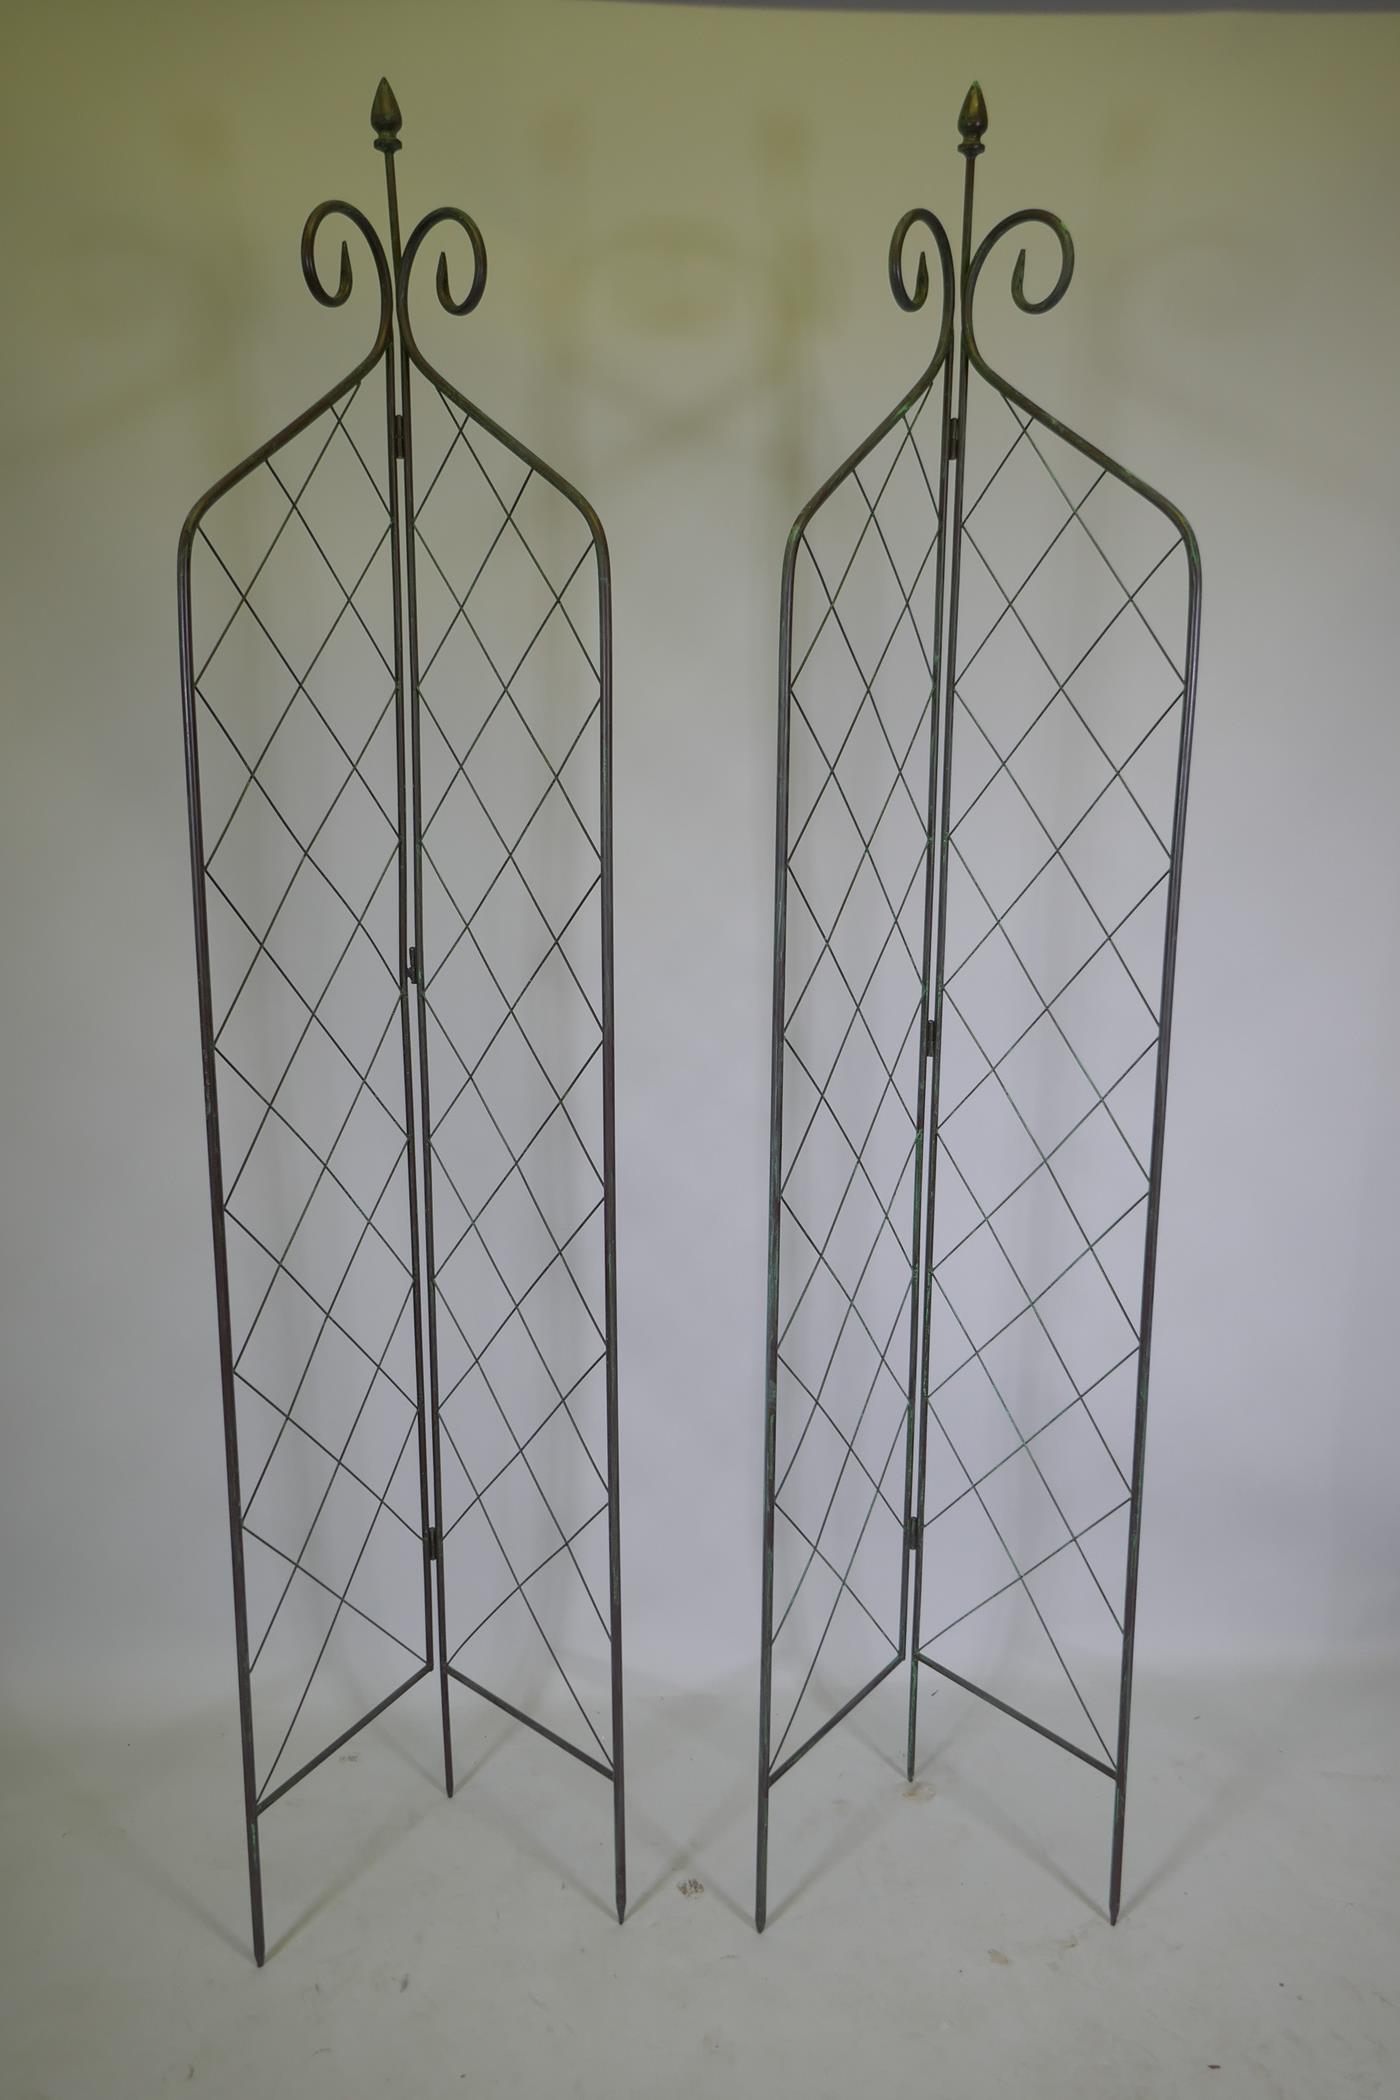 A pair of bifold metal plant supports, 210cm high